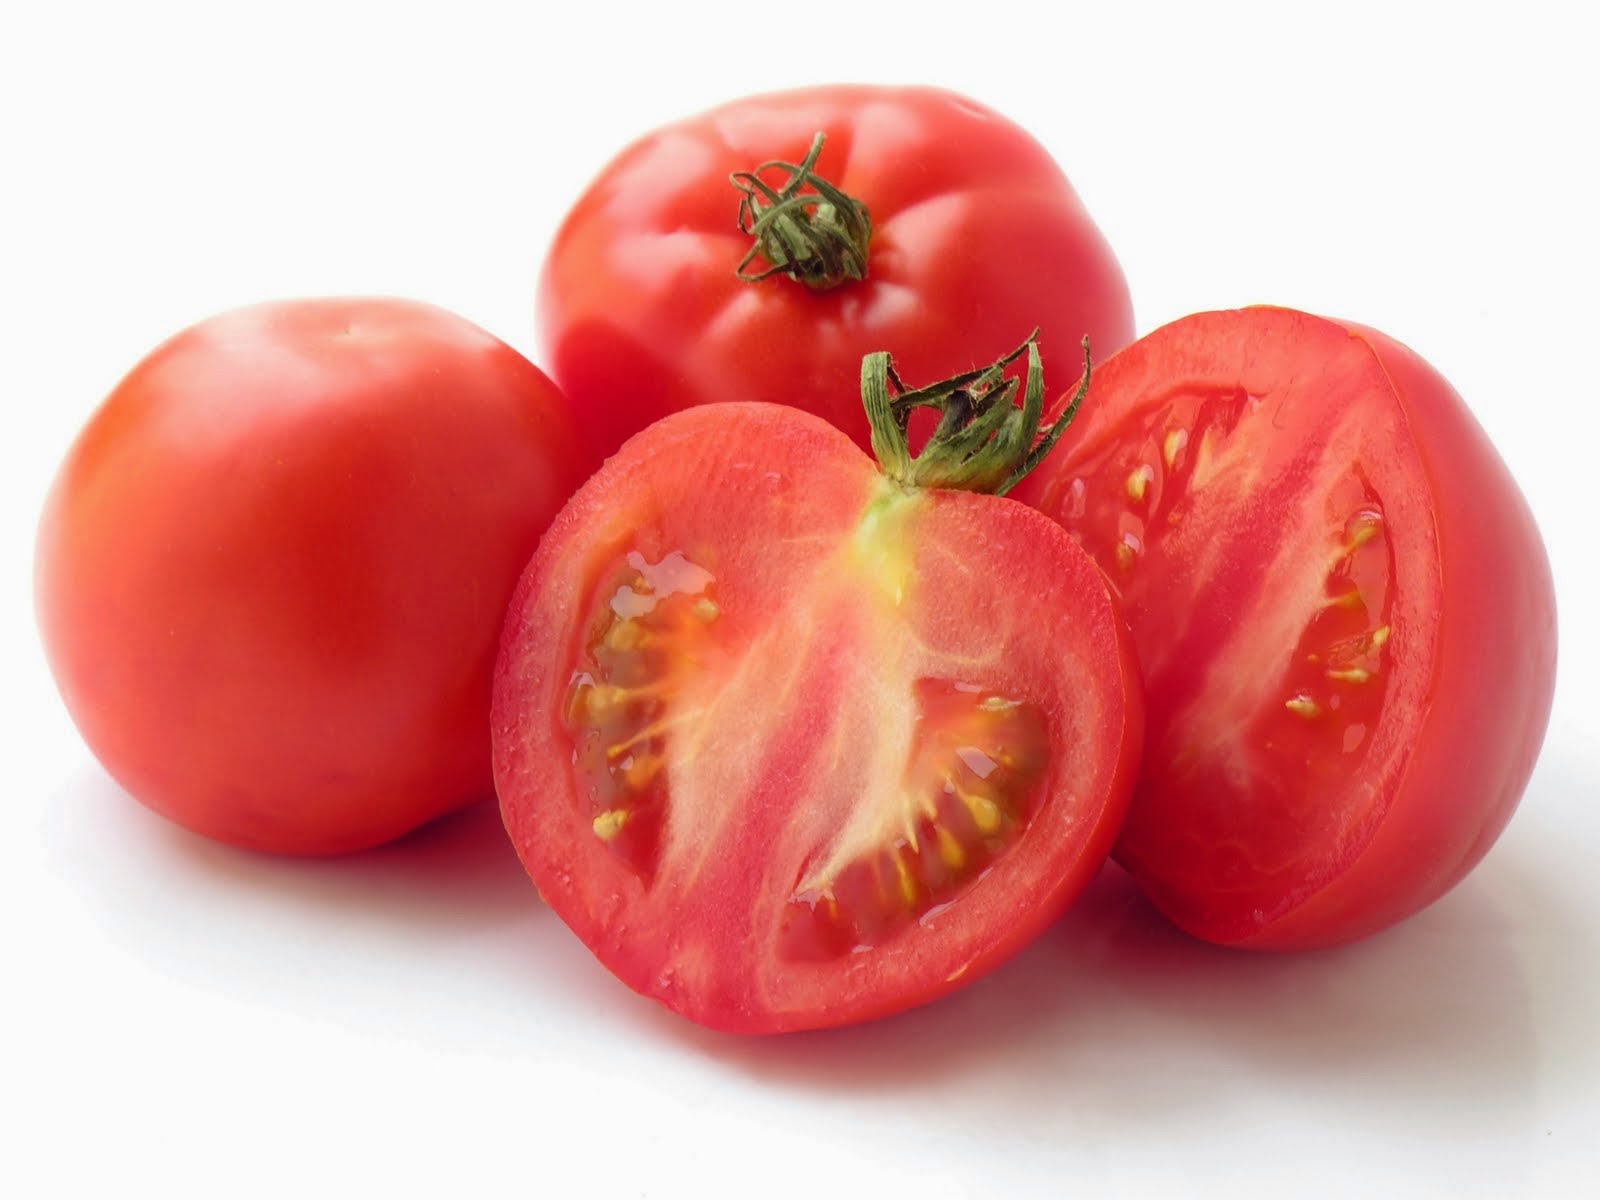 Tomatoes (Multi-nutrients Food for Healthy Heart)